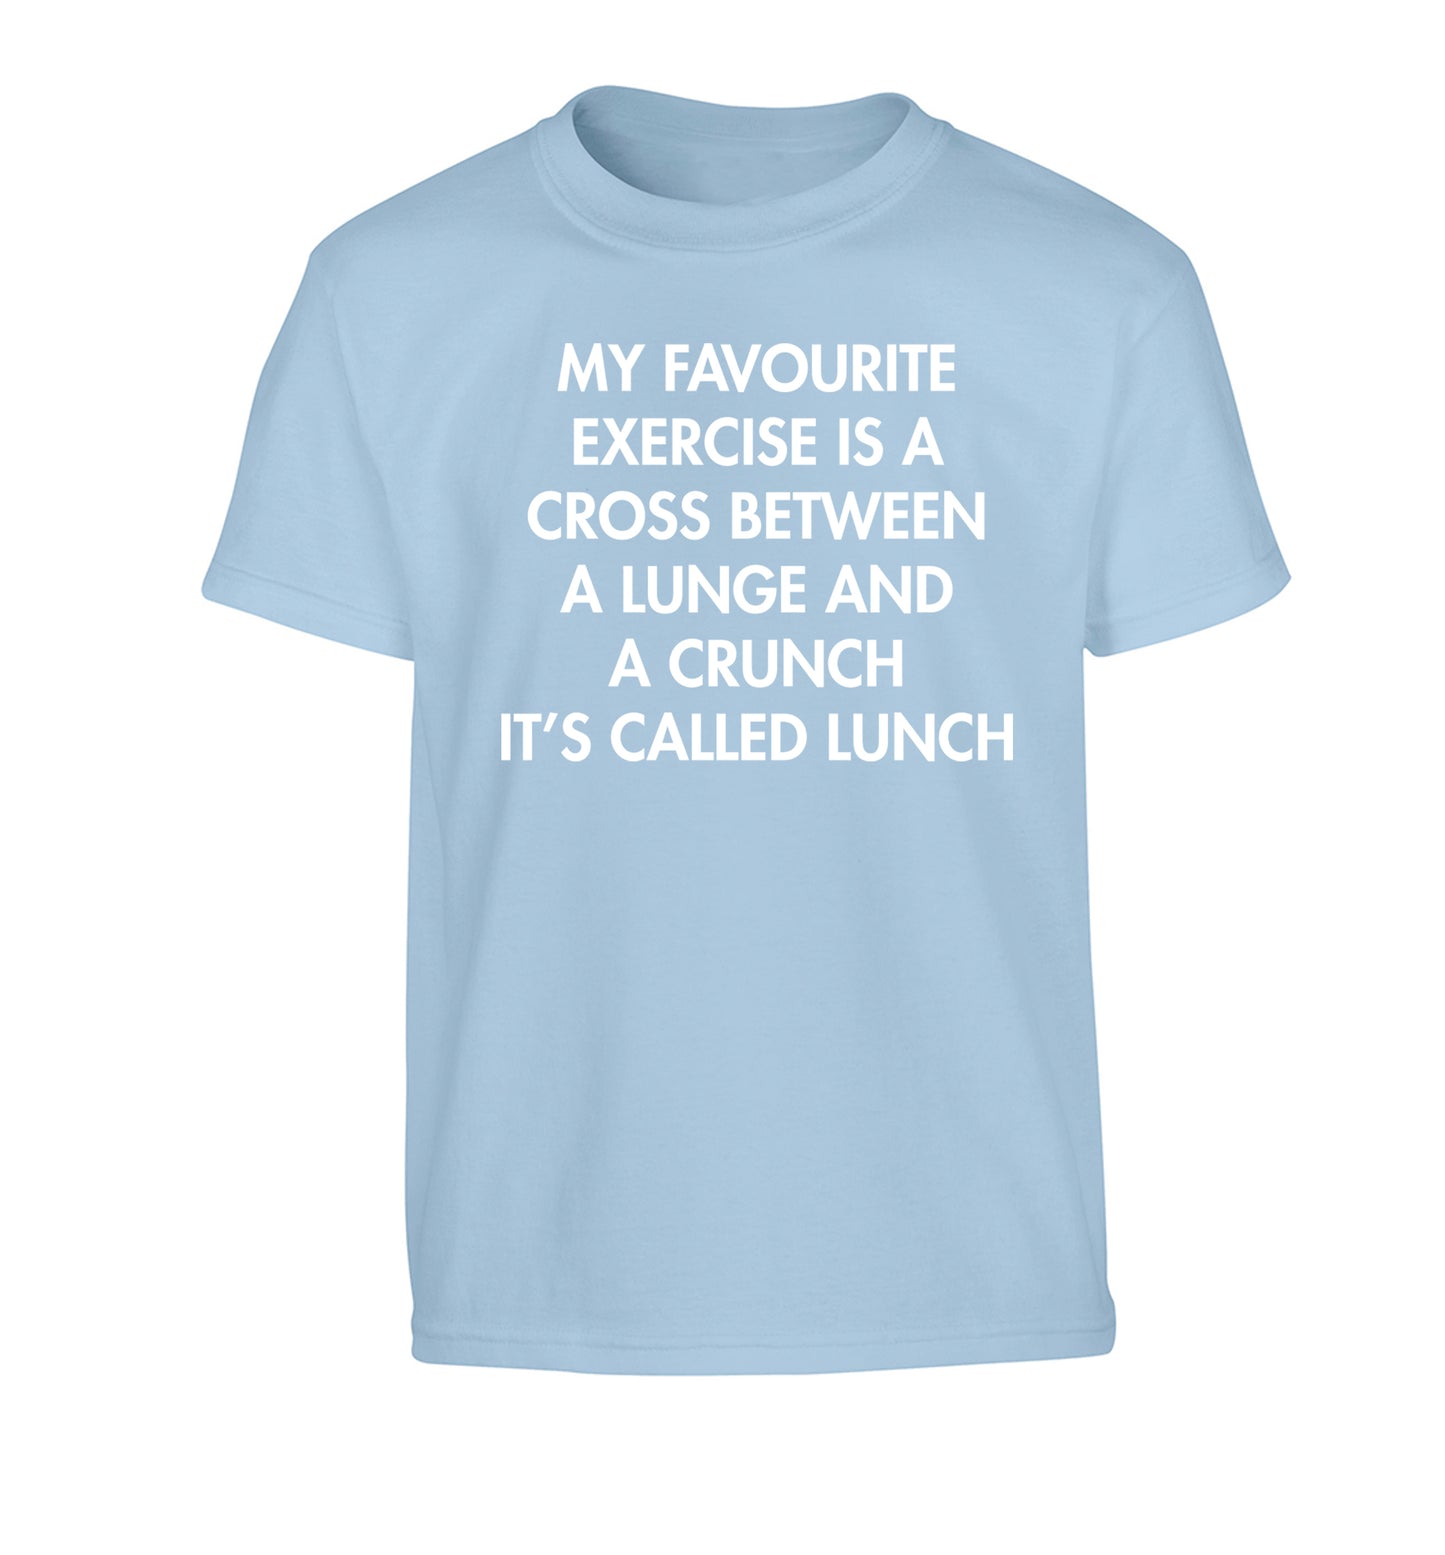 My favourite exercise is a cross between a lung and a crunch it's called lunch Children's light blue Tshirt 12-14 Years